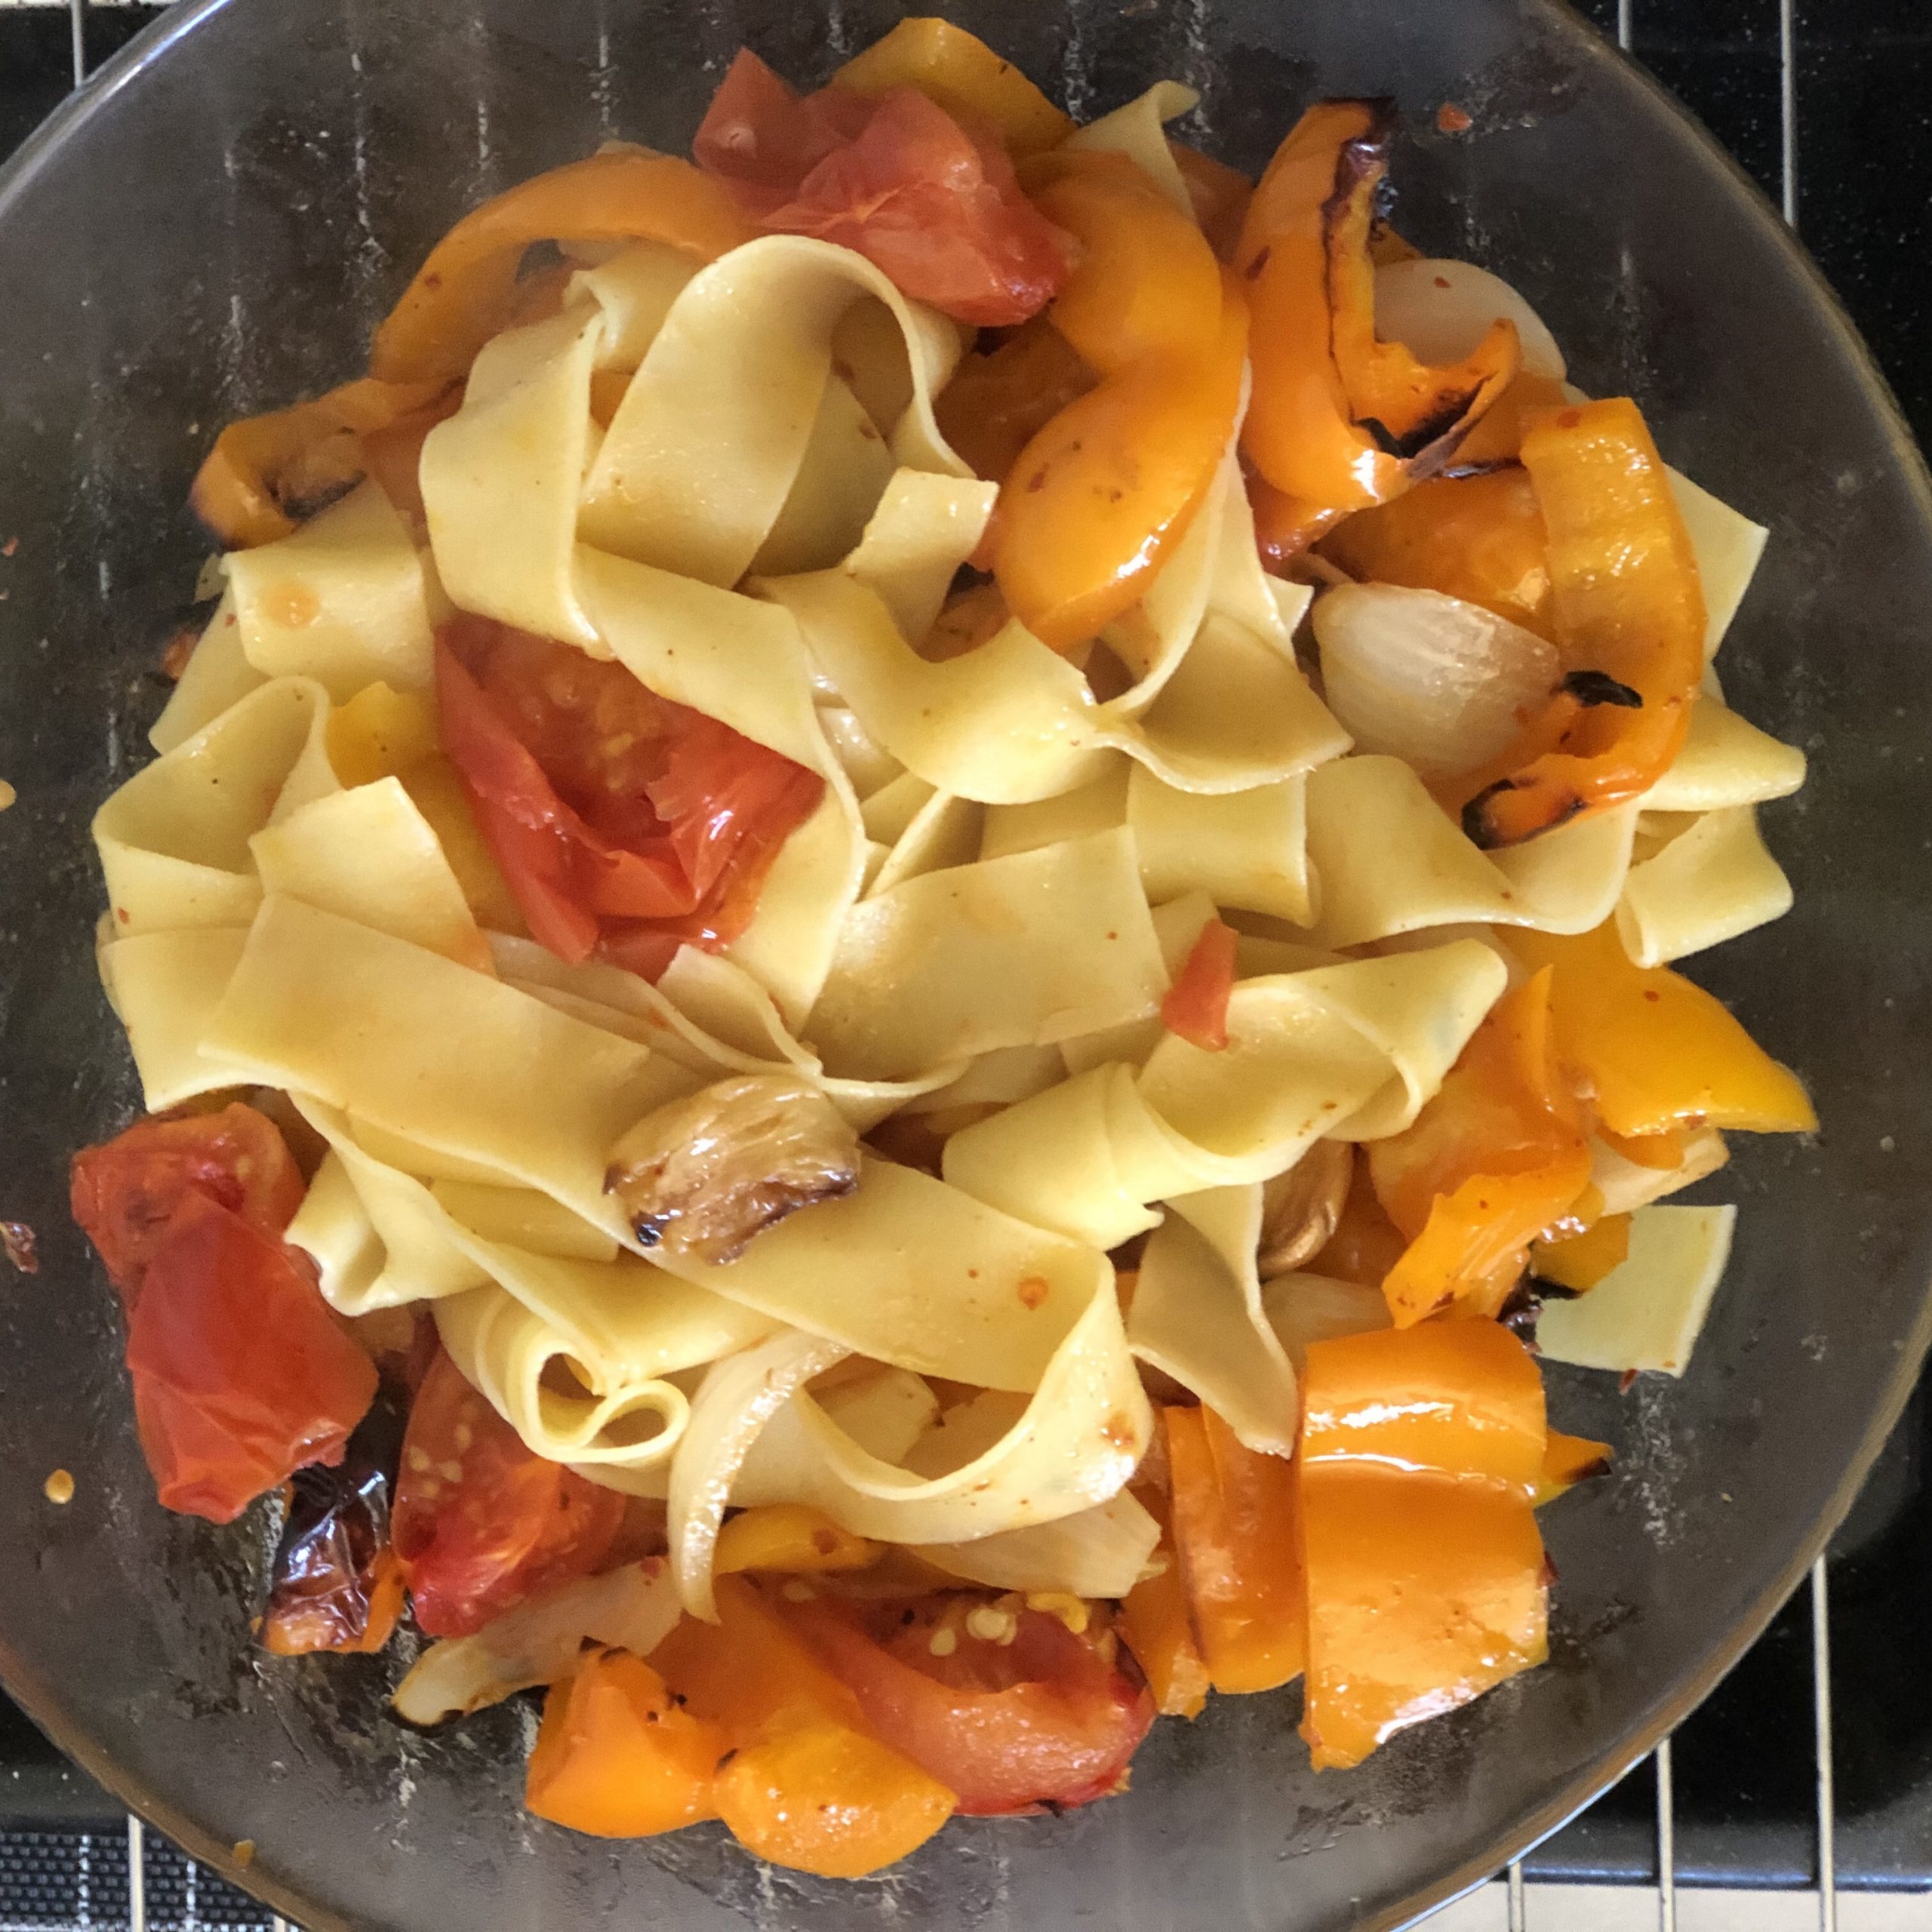 Pappardelle with roasted peppers, tomatoes, onions, chili, garlic and olive oil